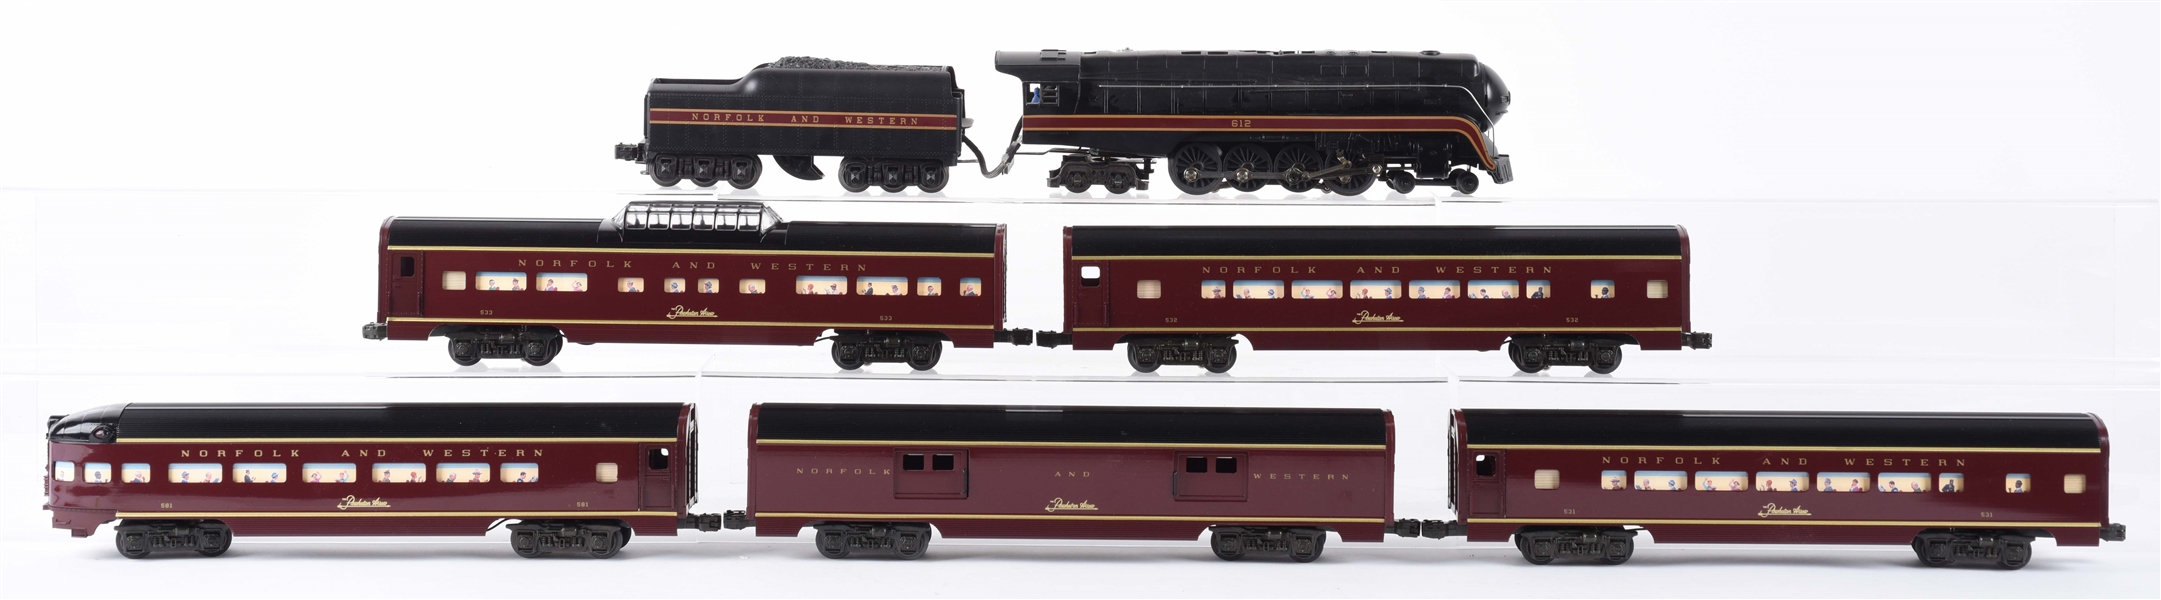 LOT OF 7: NO. 2800 WILLIAMS NORFOLK AND WESTERN PASSENGER SET.